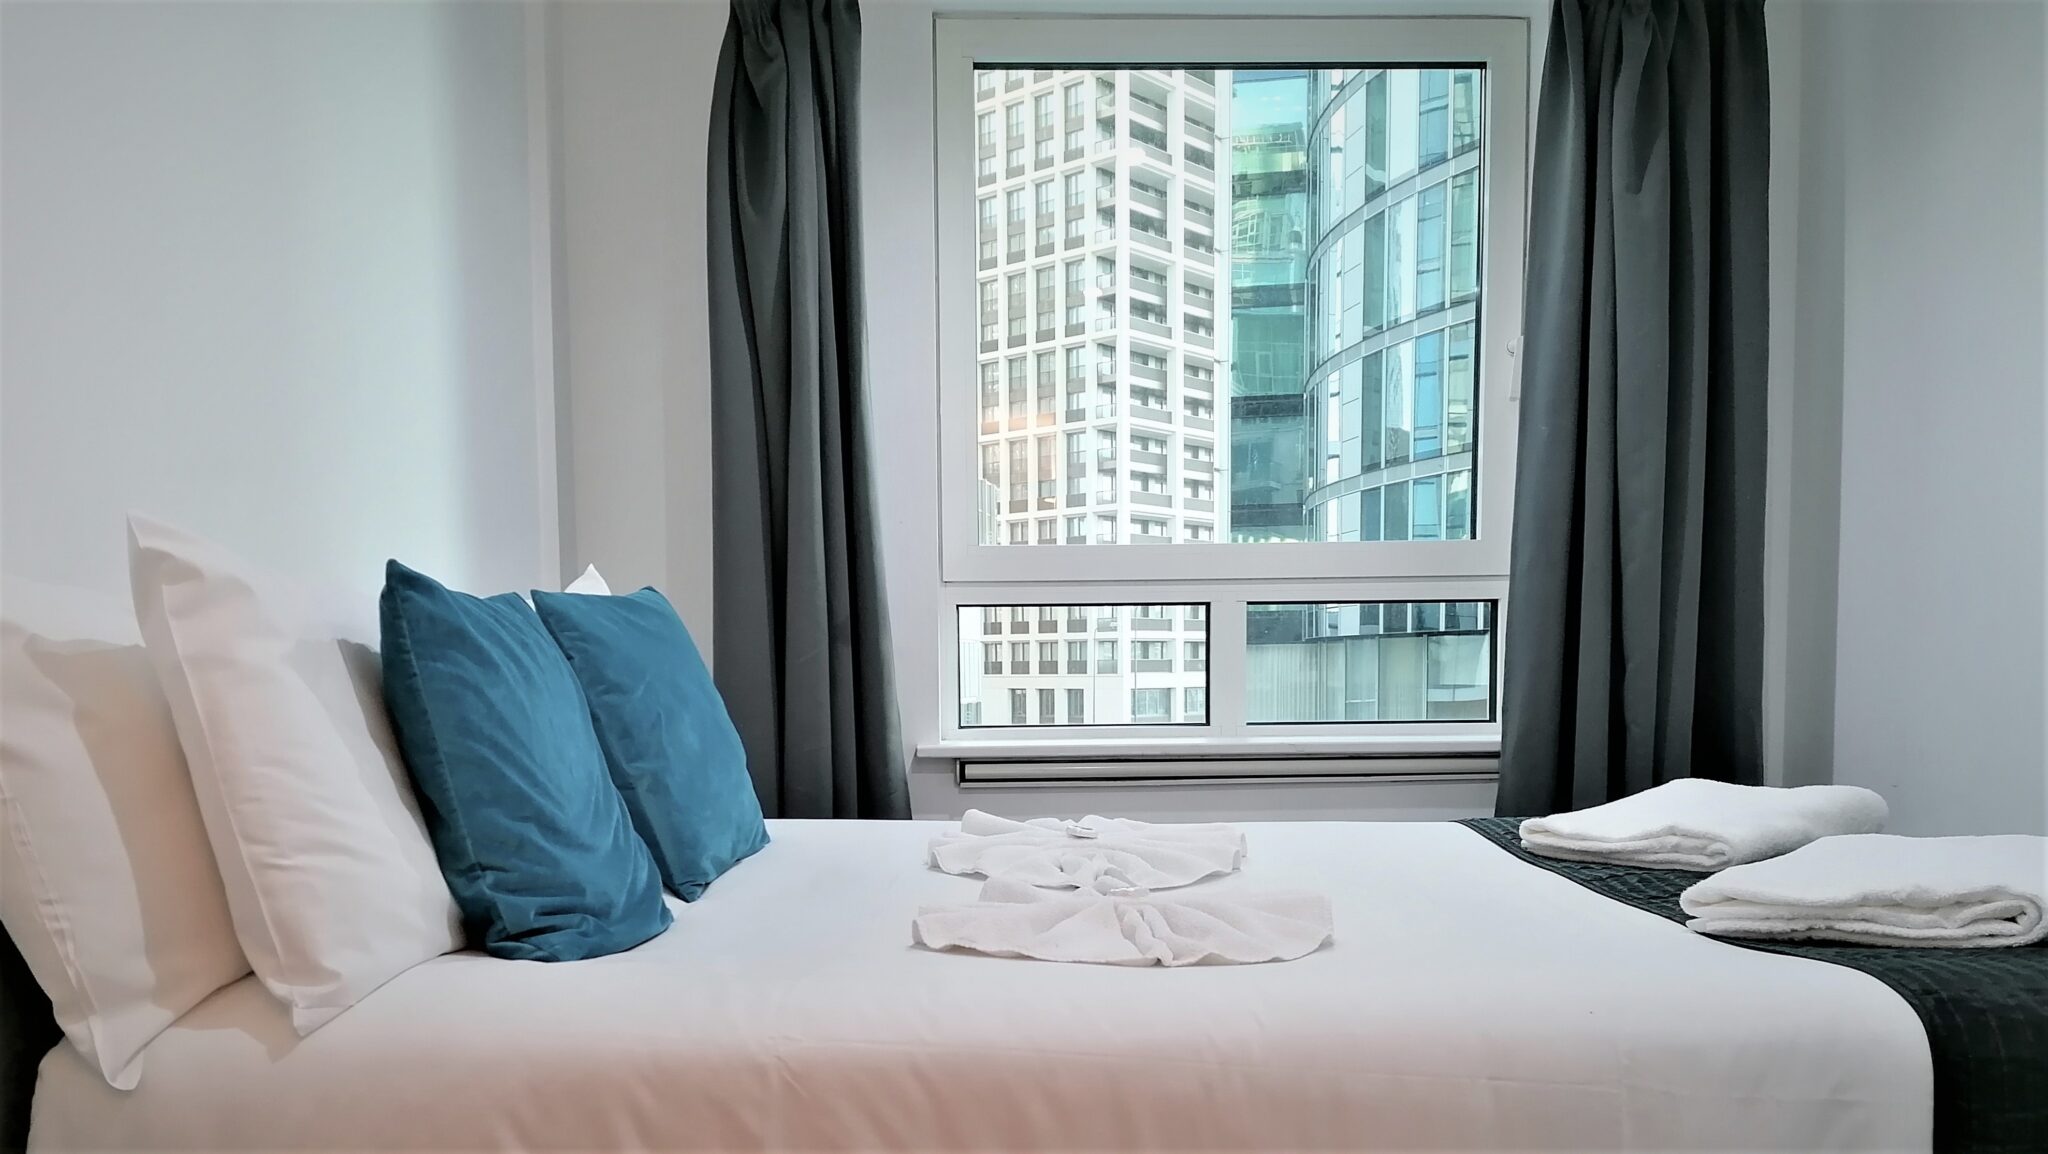 Skyline House Apartments - North London Serviced Apartments - London | Urban Stay